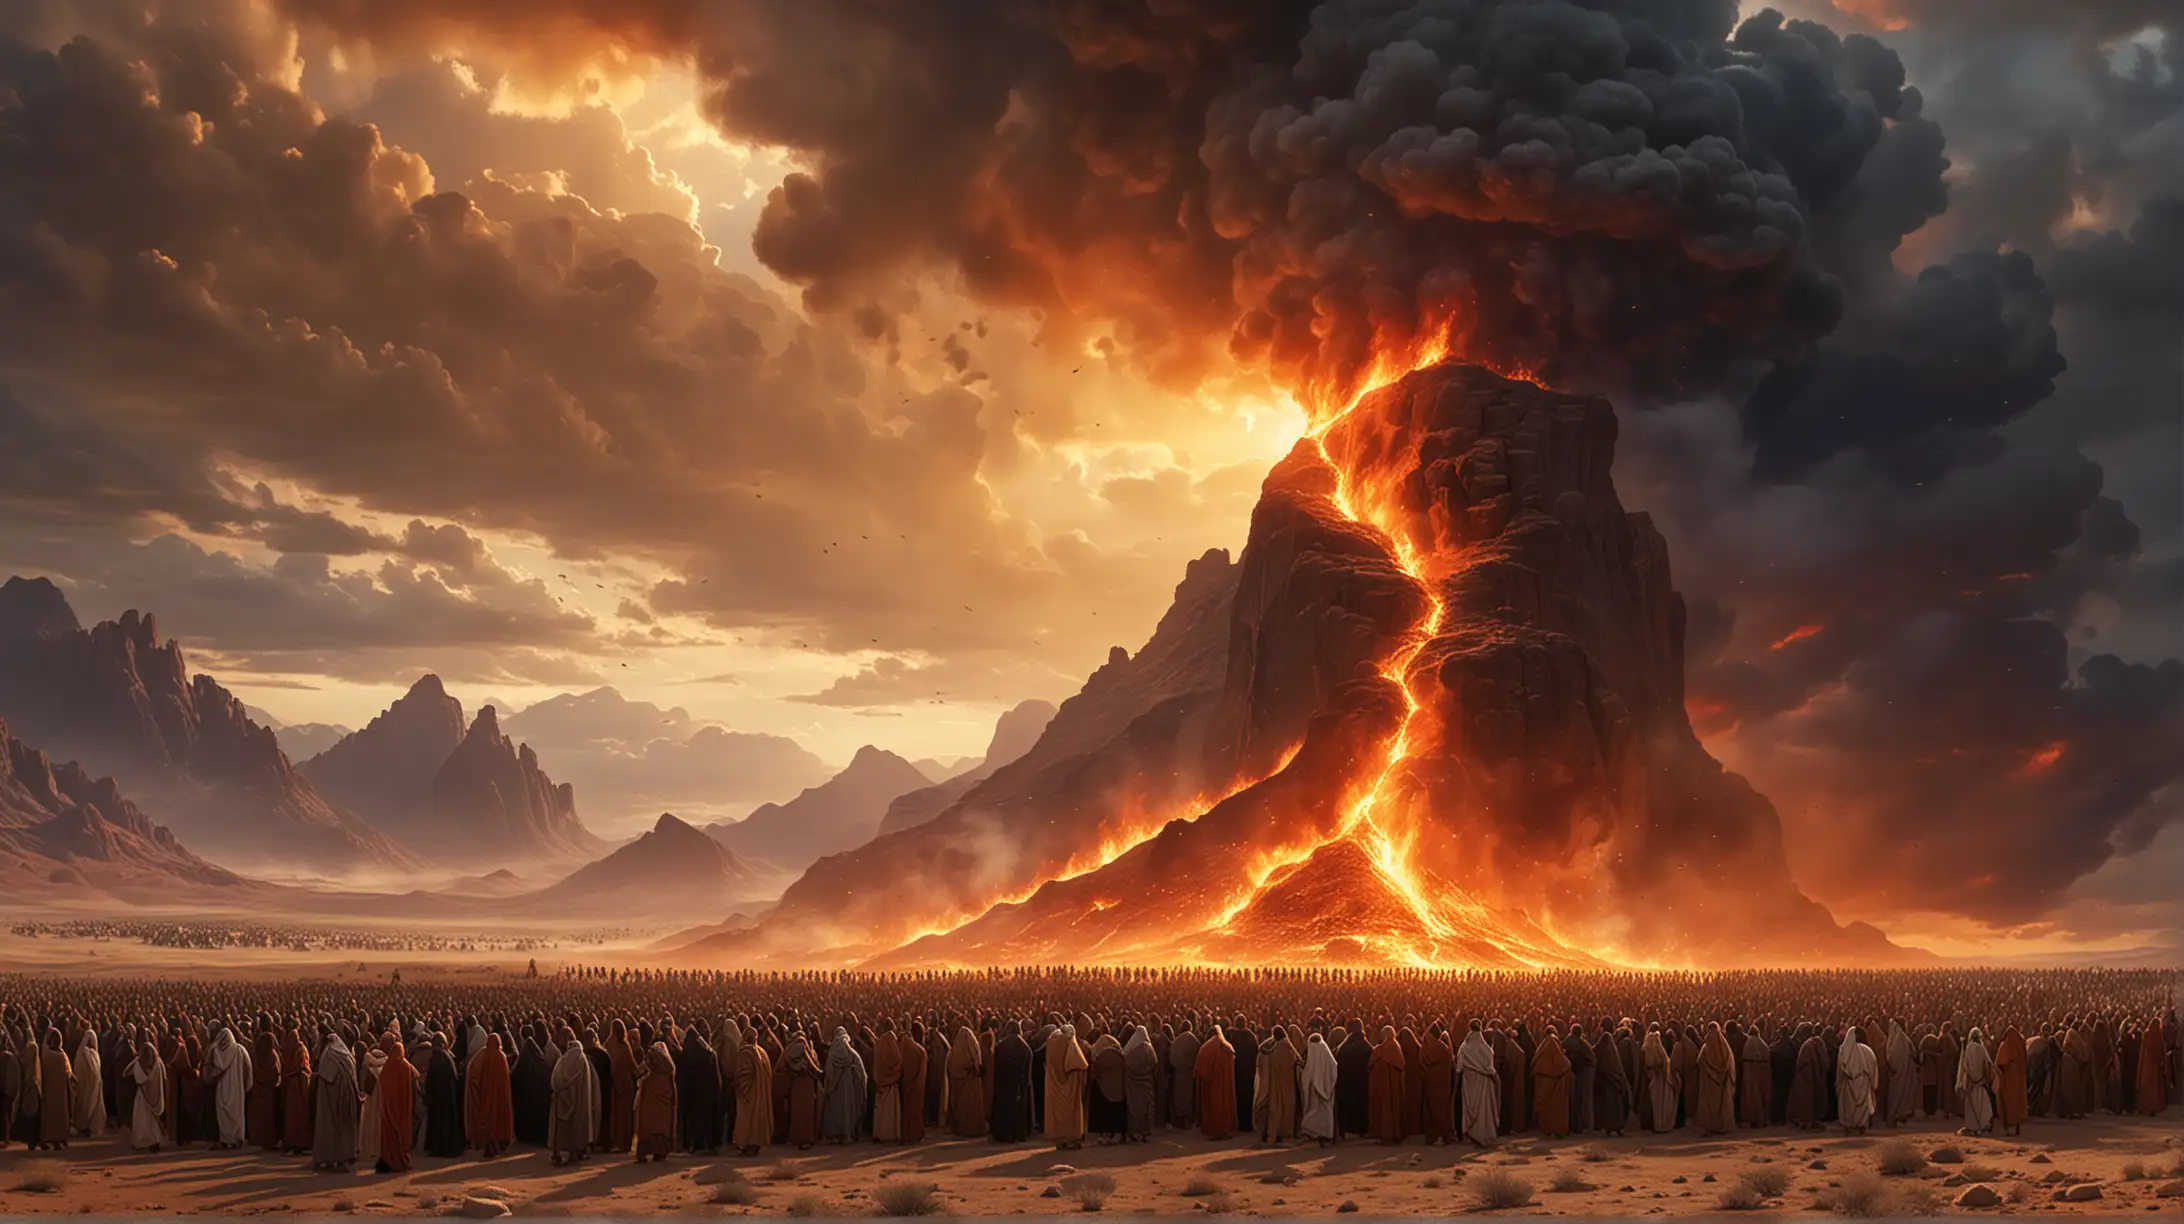 a multitude of people, in a desert, with a firey mountain, and a foreboding sky, during the era of the Biblcal Moses